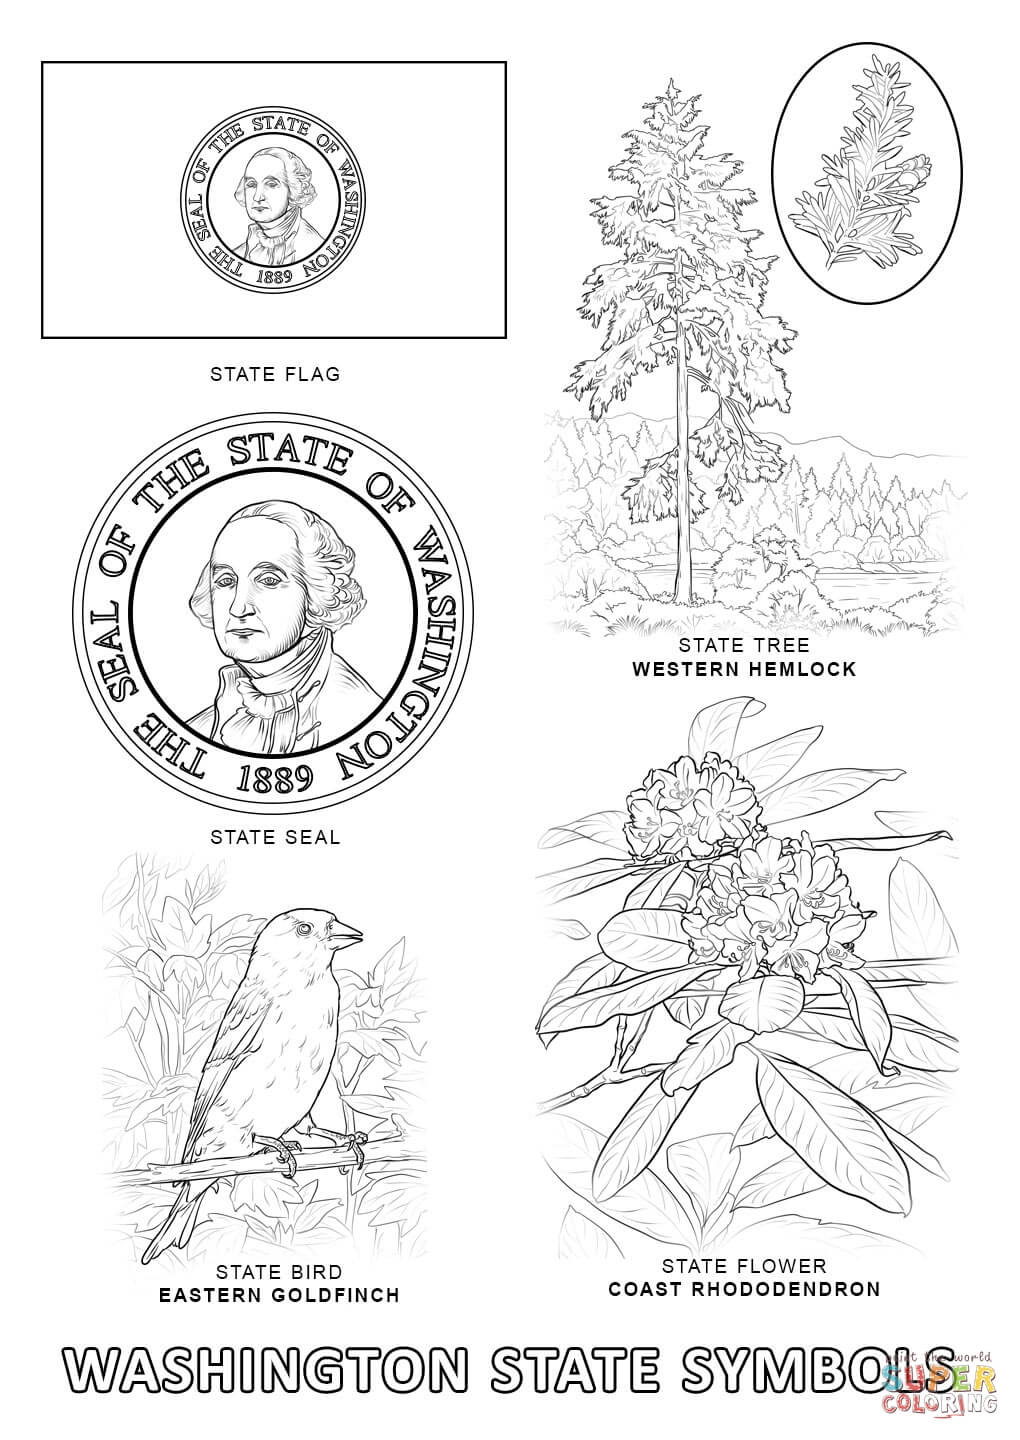 Washington State Tree Coloring Page - High Quality Coloring Pages